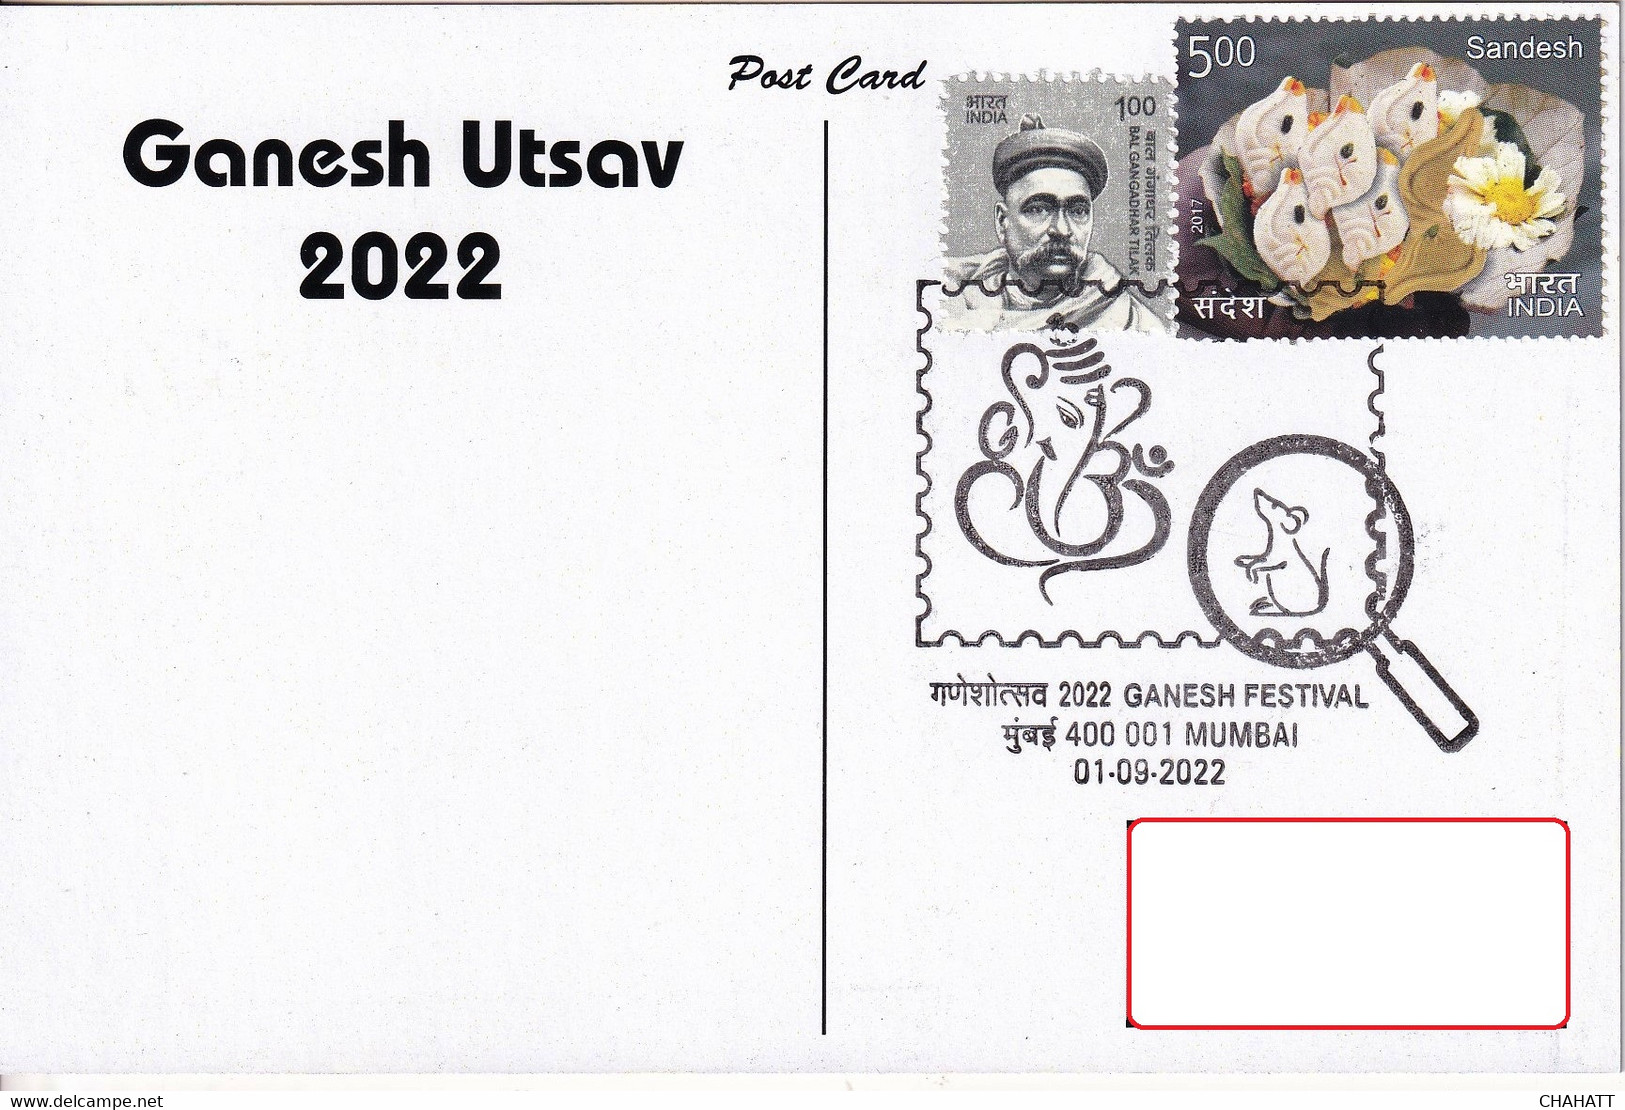 HINDUISM - LORD GANESHA - FESTIVAL -PPC WITH PICTORIAL CANCEL -#6 OF 15 -INDIA-2022- NMC2-35 - Induismo